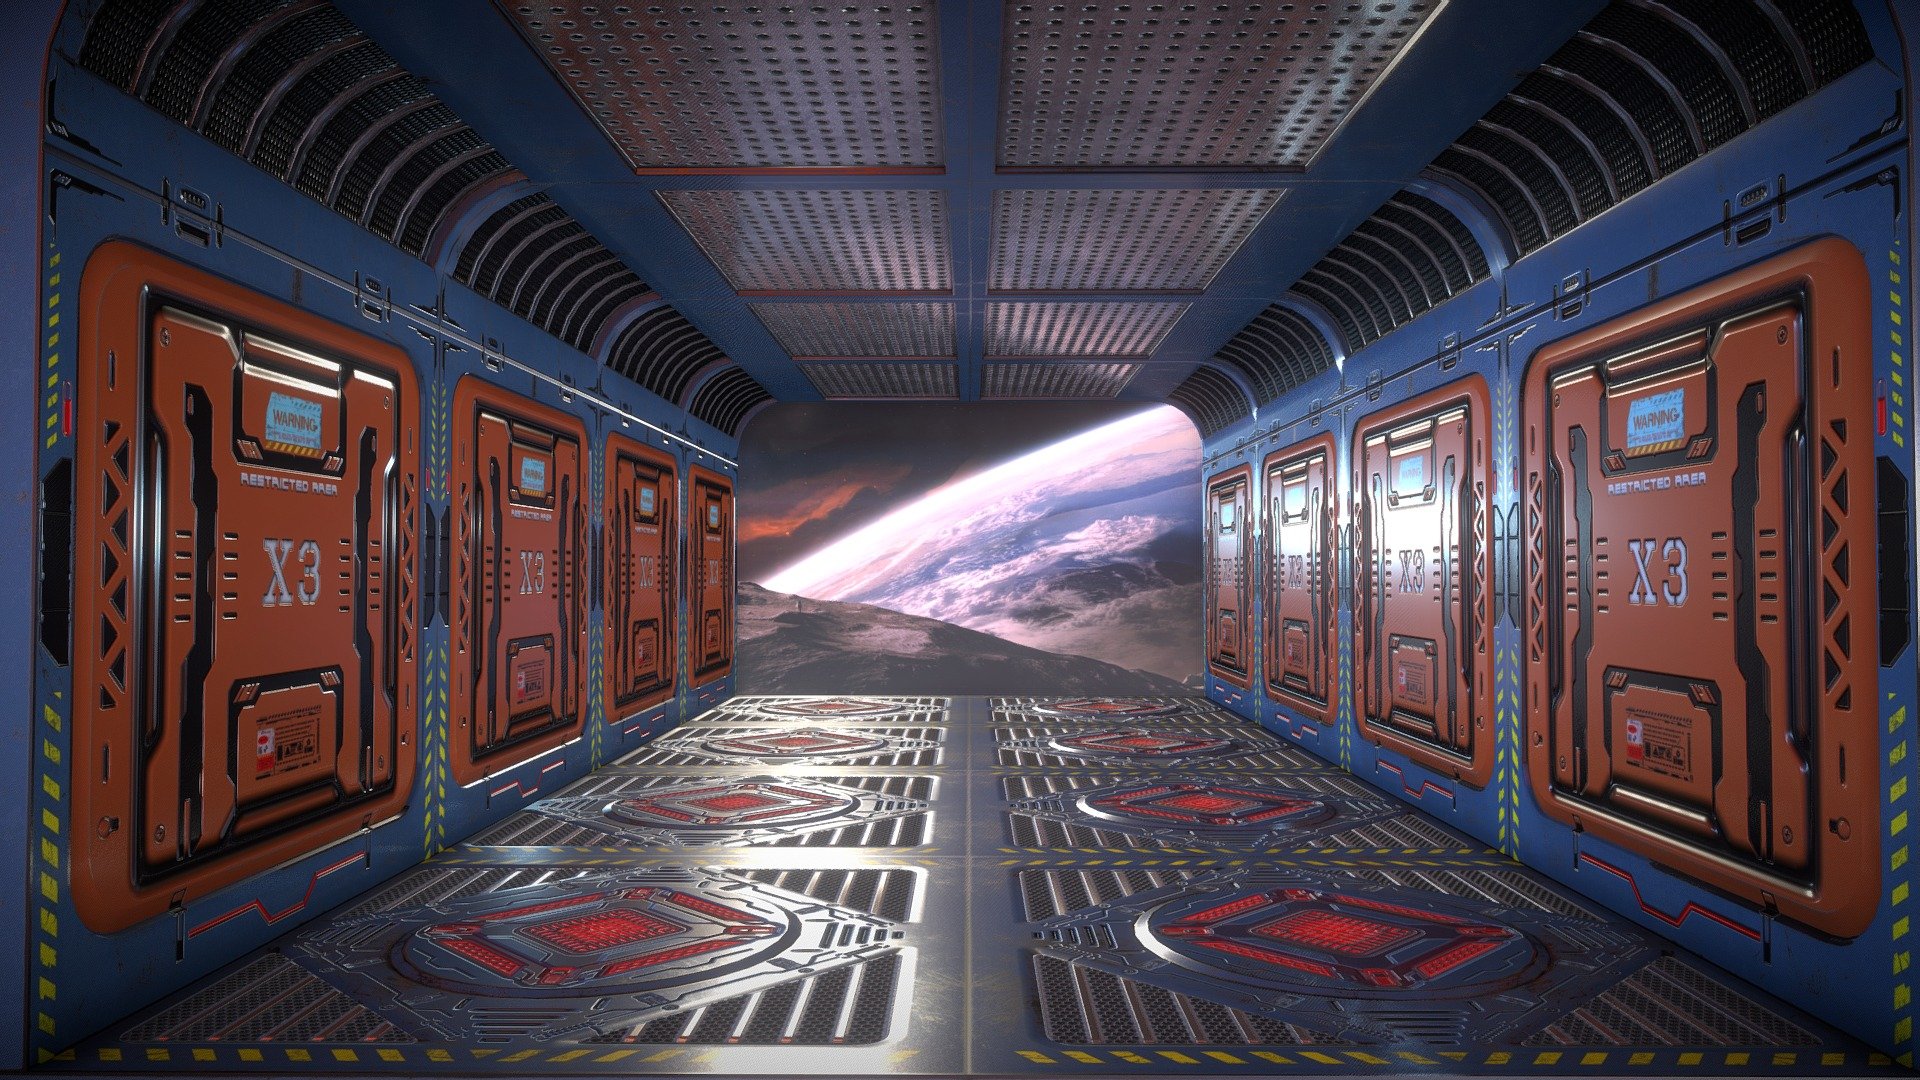 Sci fi corridor Blend file from Blender 2.8
Space texture from : https://wallpaperaccess.com/earth-from-space

I made this model a  time ago to practice pbr texture , I decided to share this with my friends on Sketchfab
all textures packed to the blend file and you can open the file in blender 2.8 ( free awesome 3d program )
i hope you like this and follow me because a lot of models are on the way for free

Music is my original music! https://payamtavakoli.bandcamp.com/music

My Artstation : https://www.artstation.com/payamtavakoli/albums/all

Follow me on instagram : https://www.instagram.com/payam.tavakoli/ - Sci Fi Spacestation Corridor - Download Free 3D model by Payam Tavakoli (@payamtavakoli) 3d model